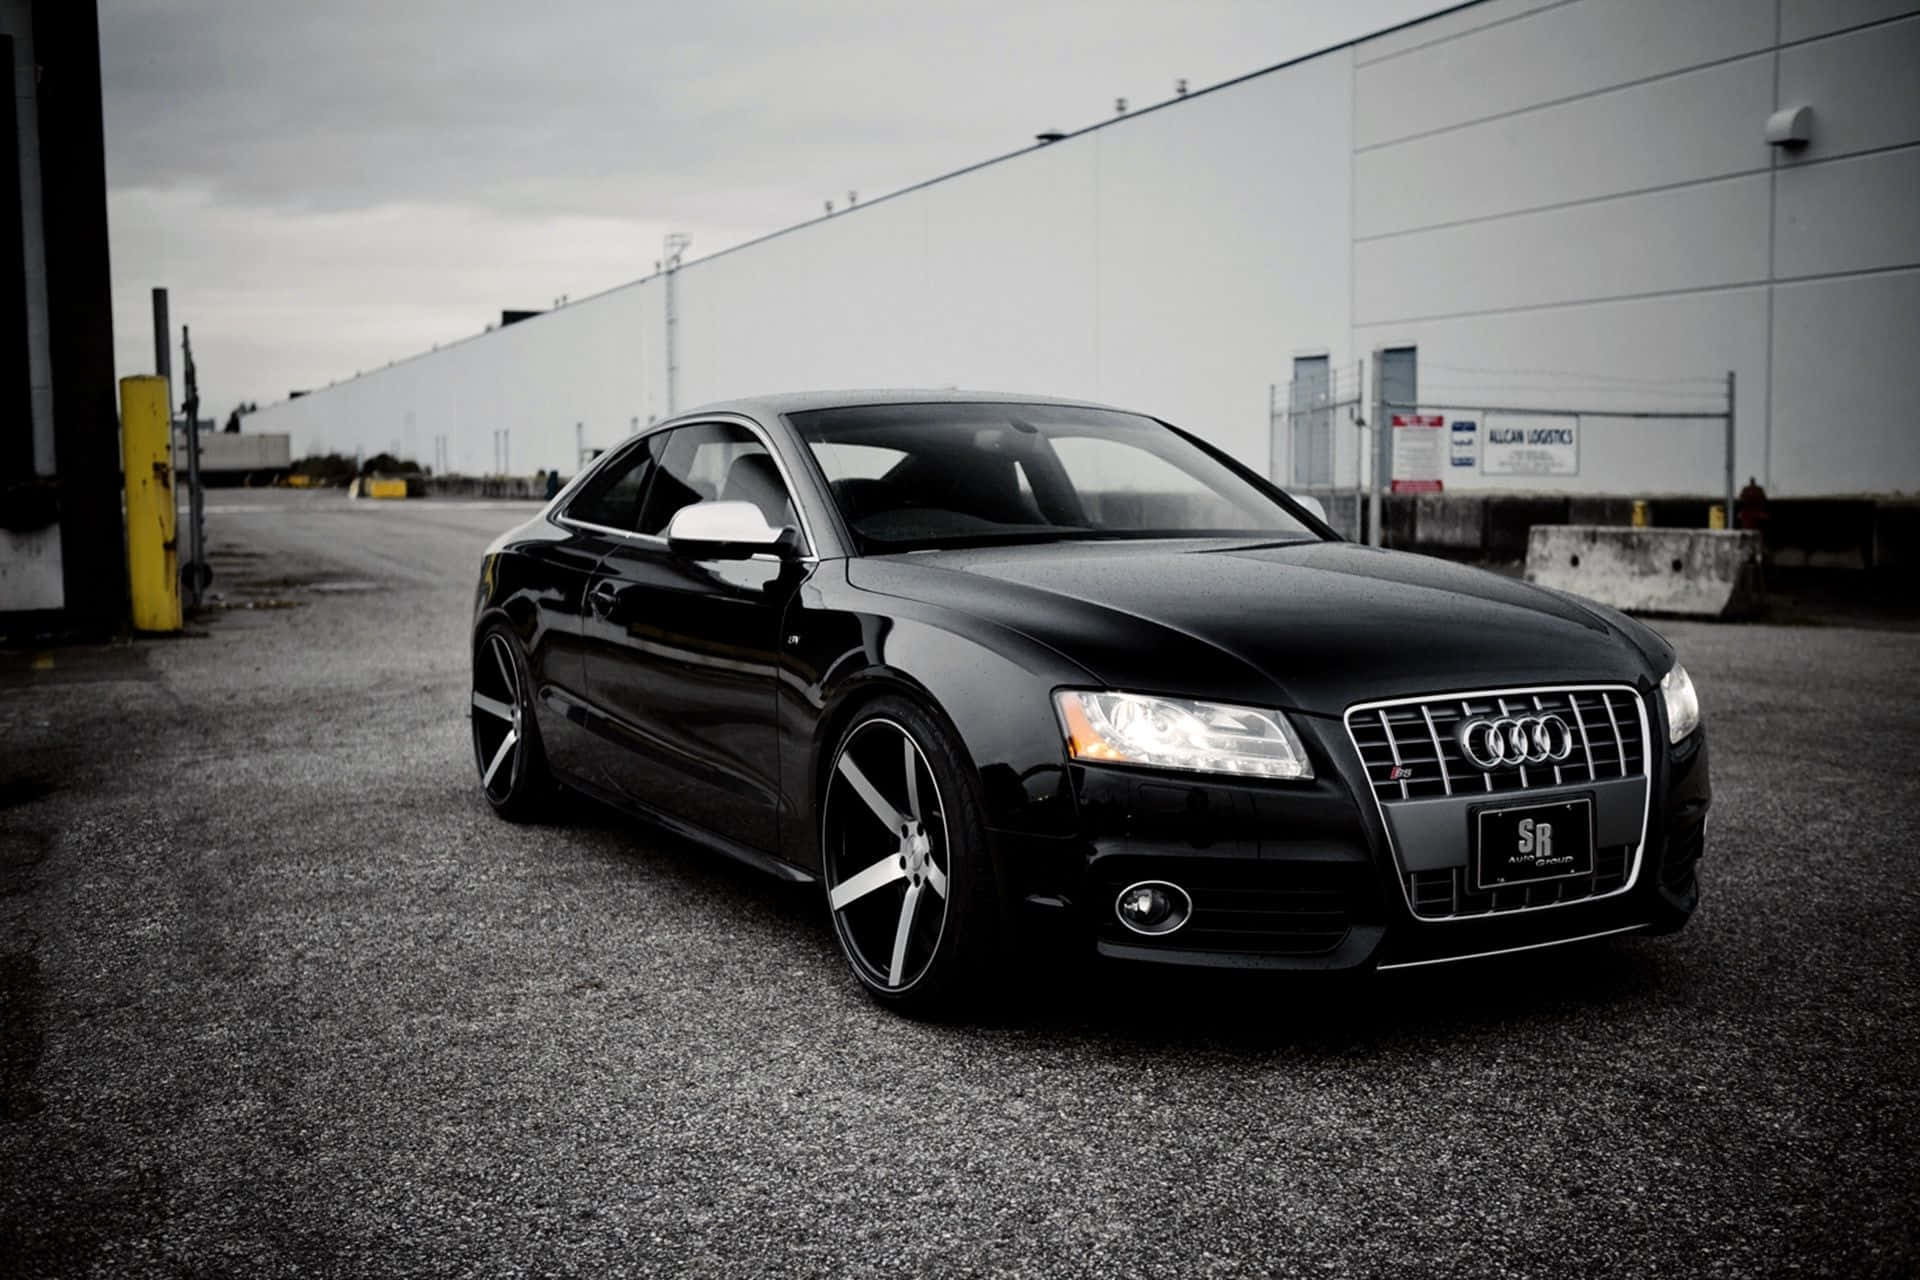 Captivating Audi S4 in Action Wallpaper